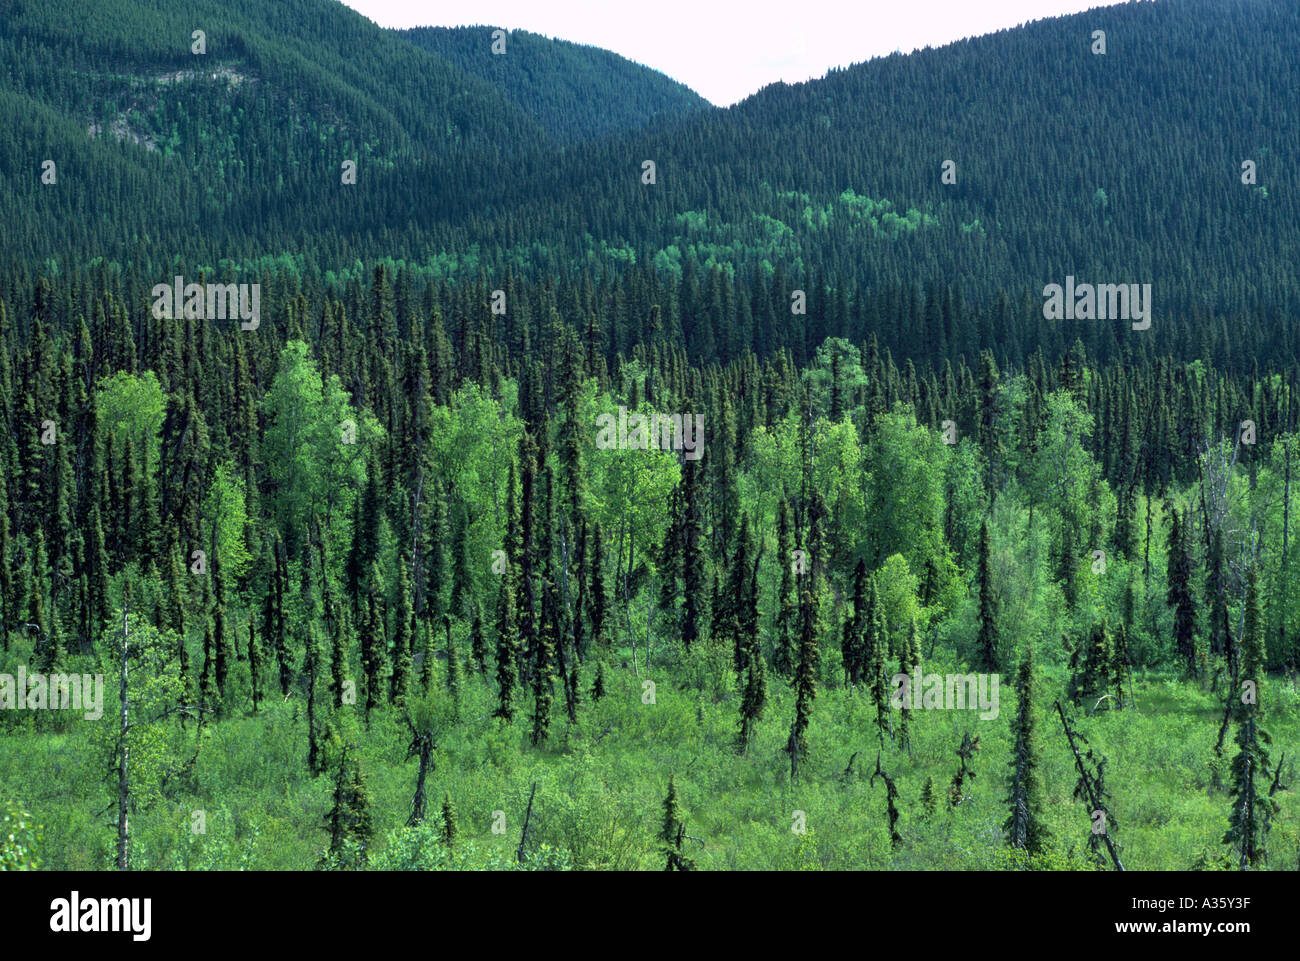 Northern BC, British Columbia, Canada - Mixed Boreal Forest, Coniferous & Deciduous Trees Stock Photo